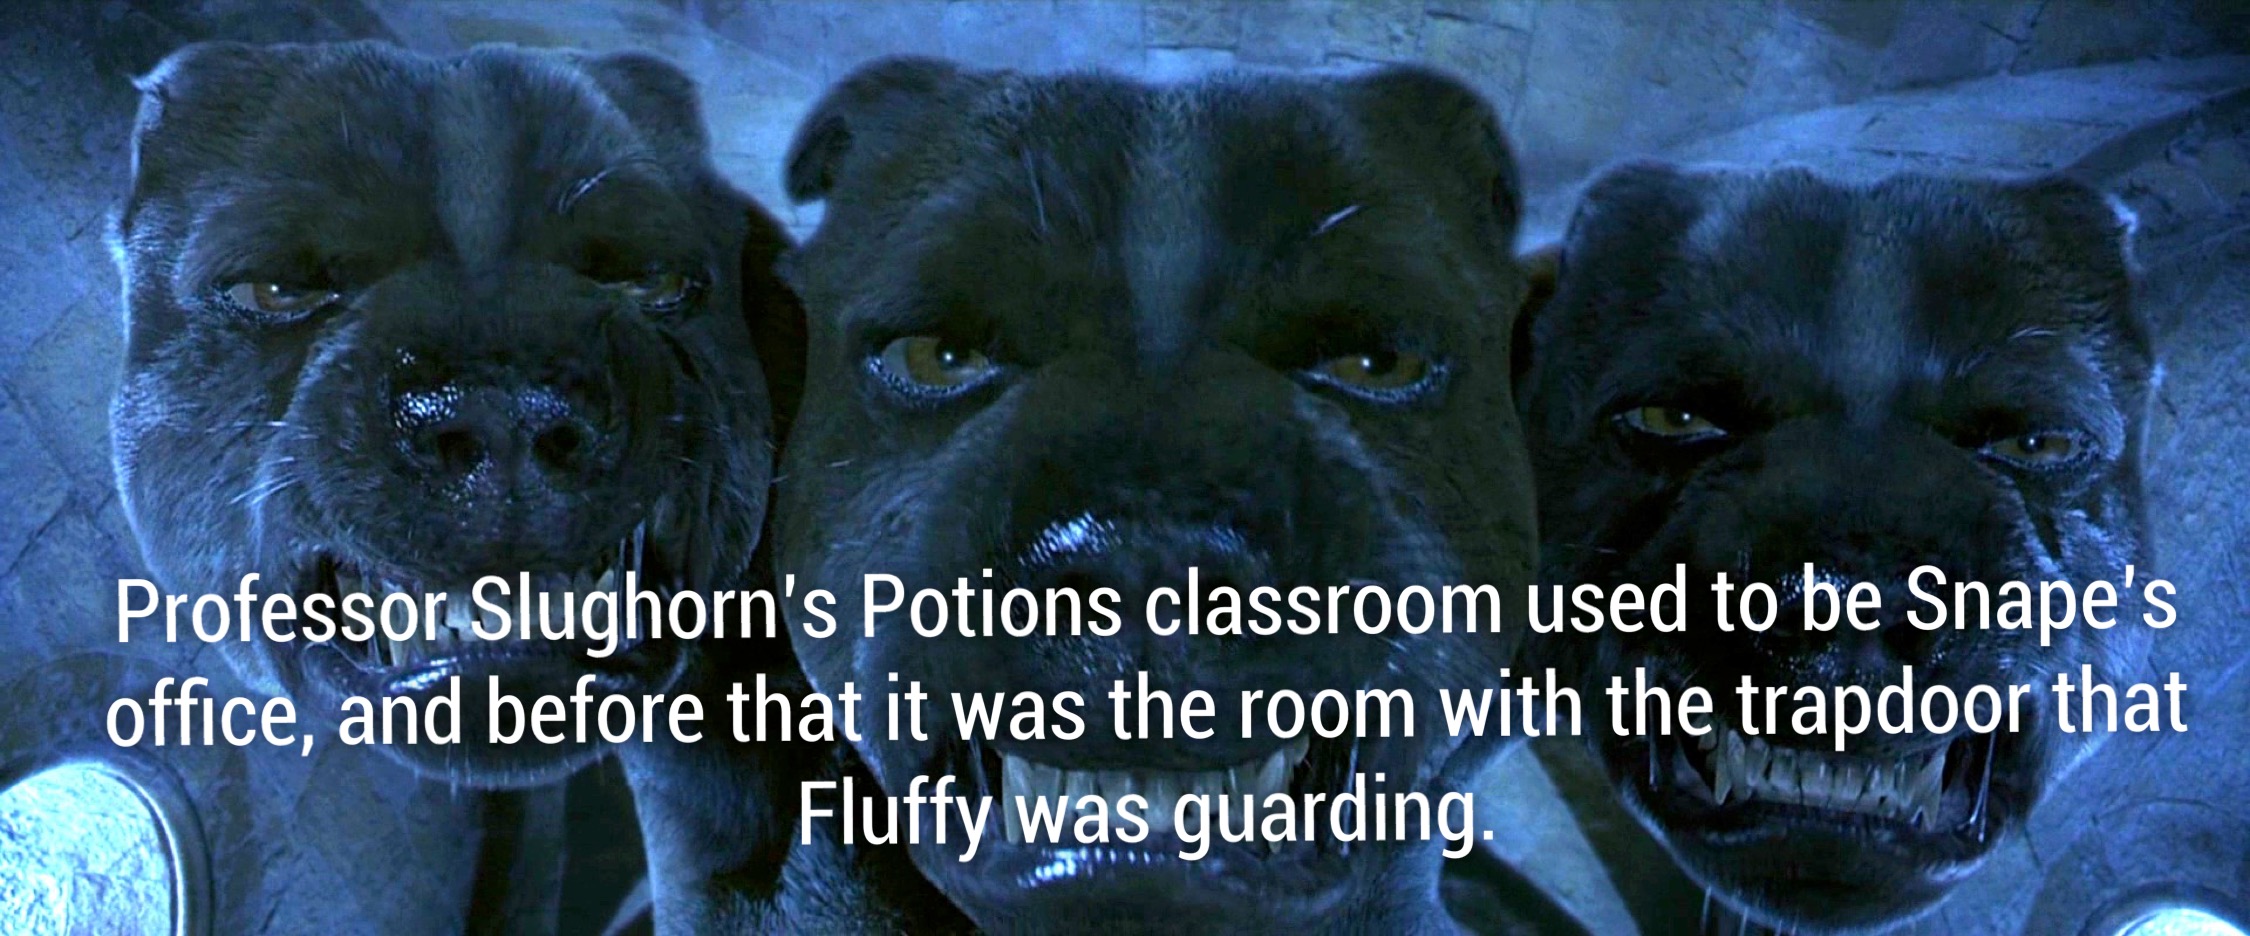 Professor Slughorn's Potions classroom used to be Snape's office, and before that it was the room with the trapdoor that Fluffy was guarding.